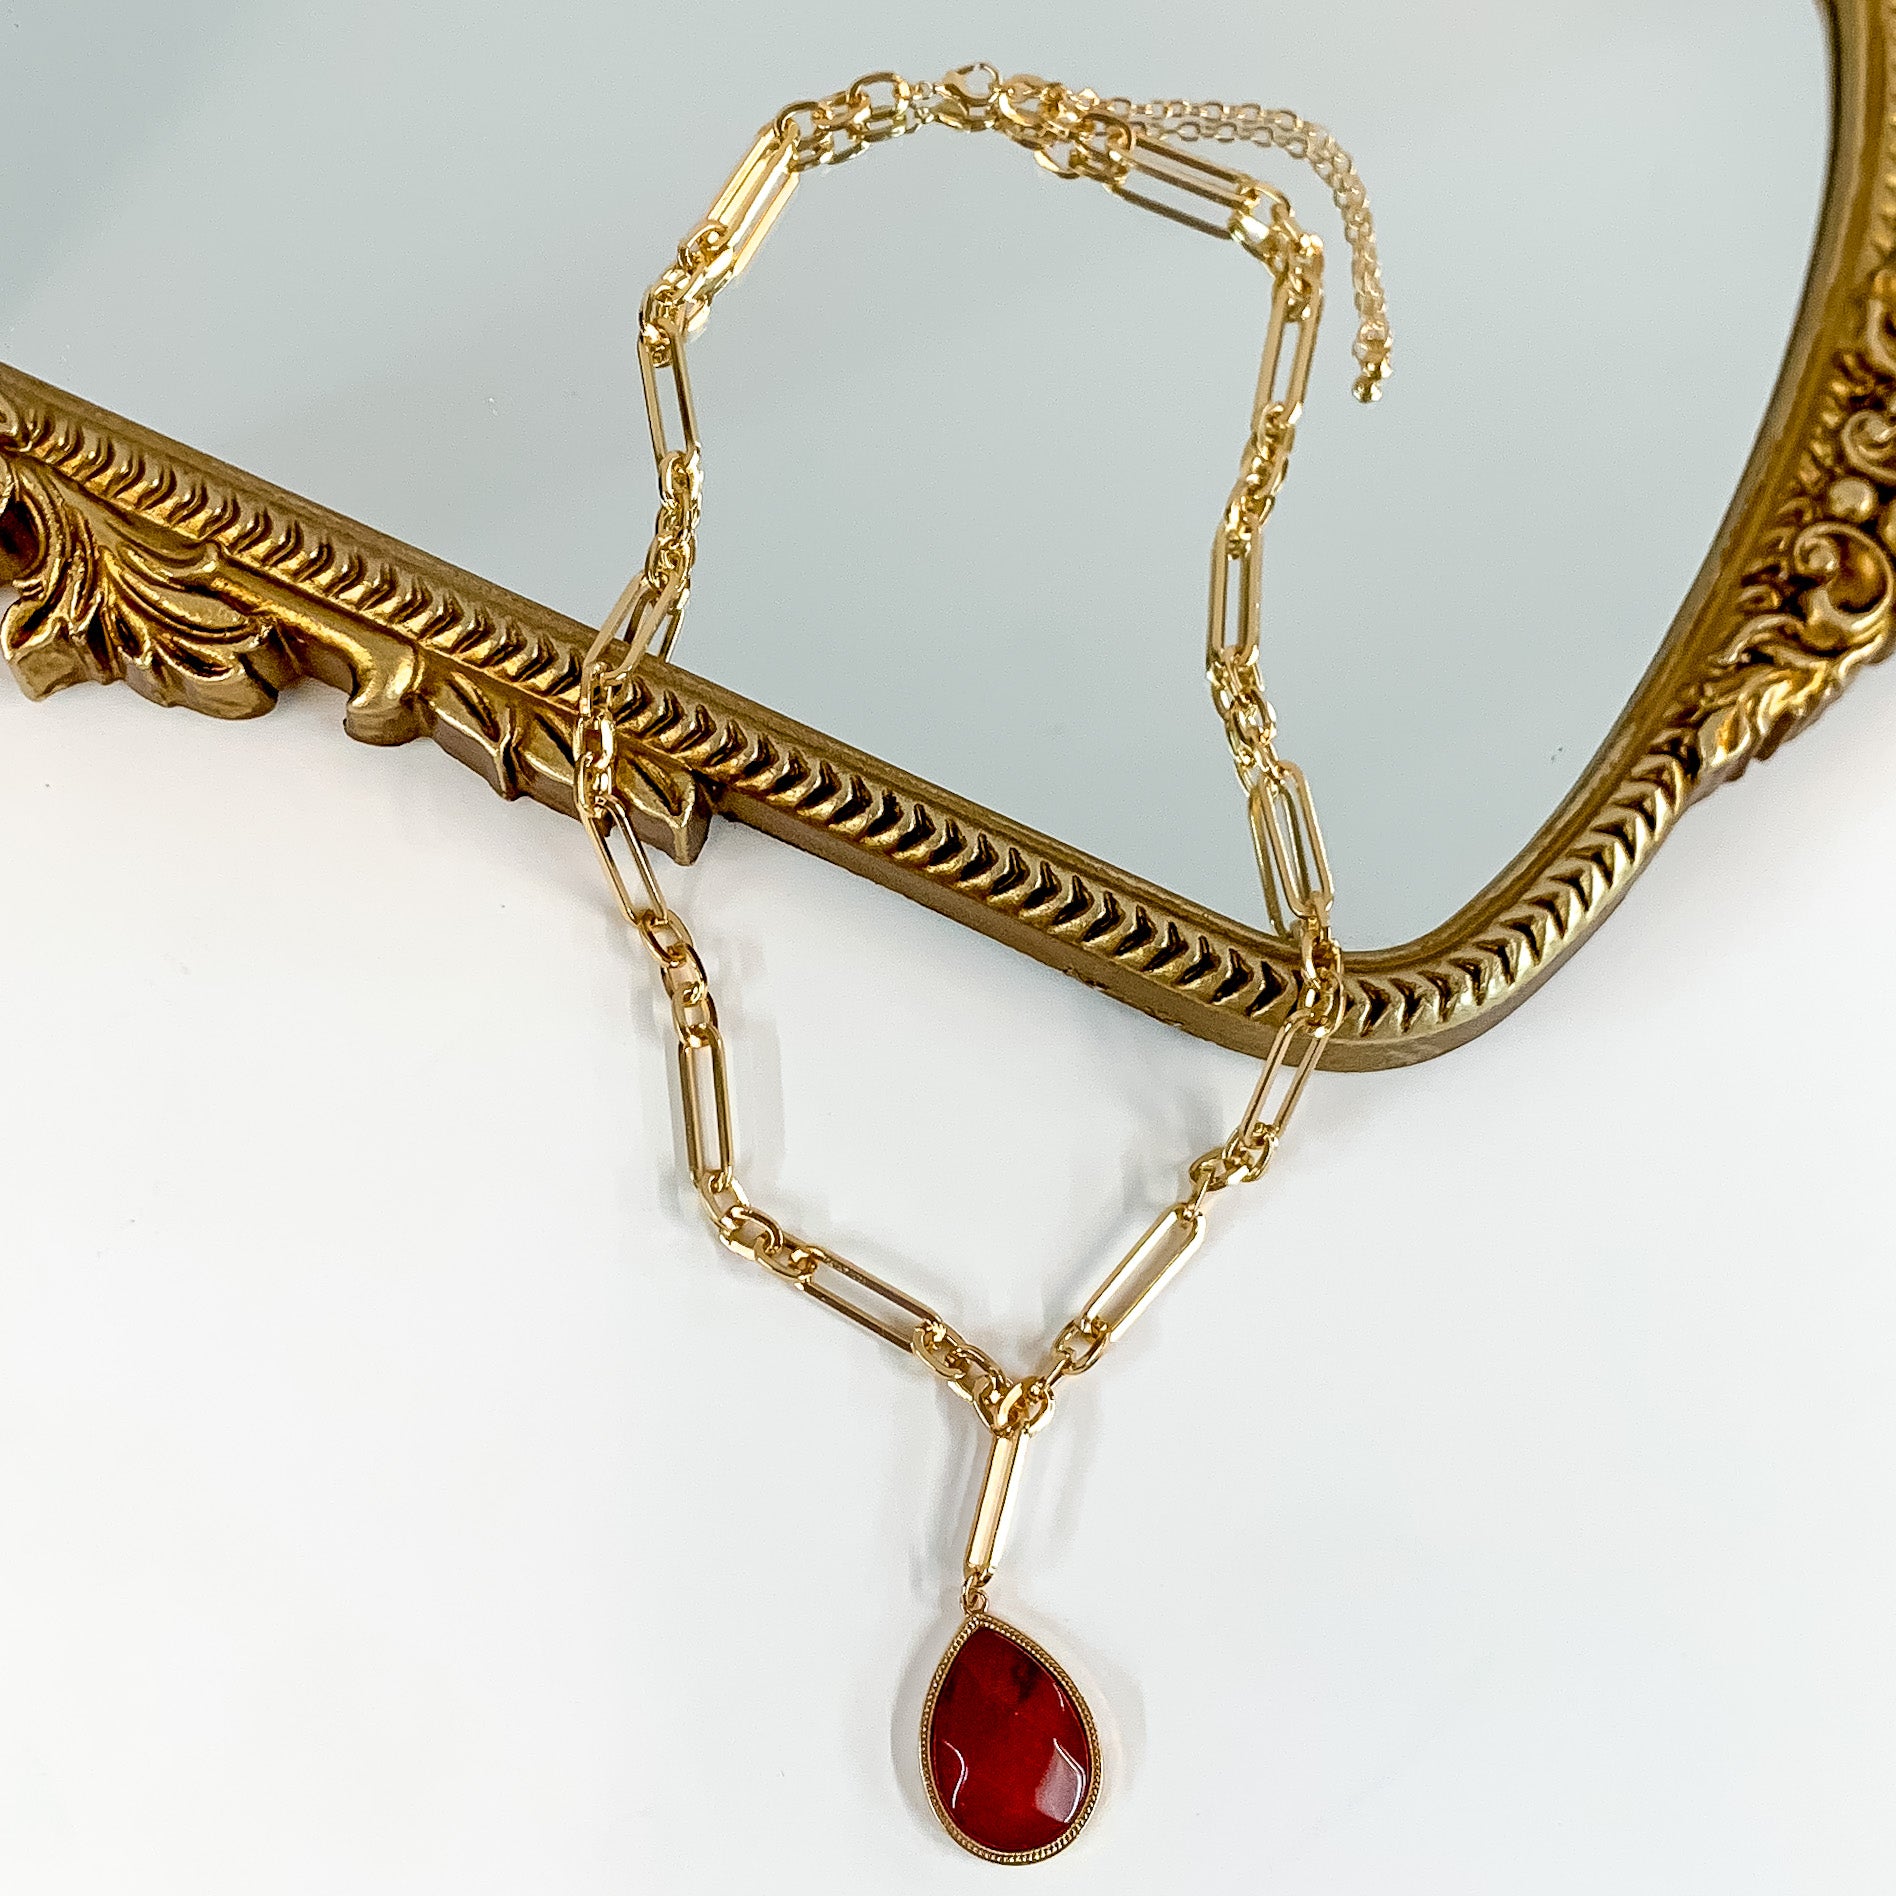 Gold Tone Chain Necklace with Pendant in Maroon. Pictured on a white background with part of the necklace over a mirror.